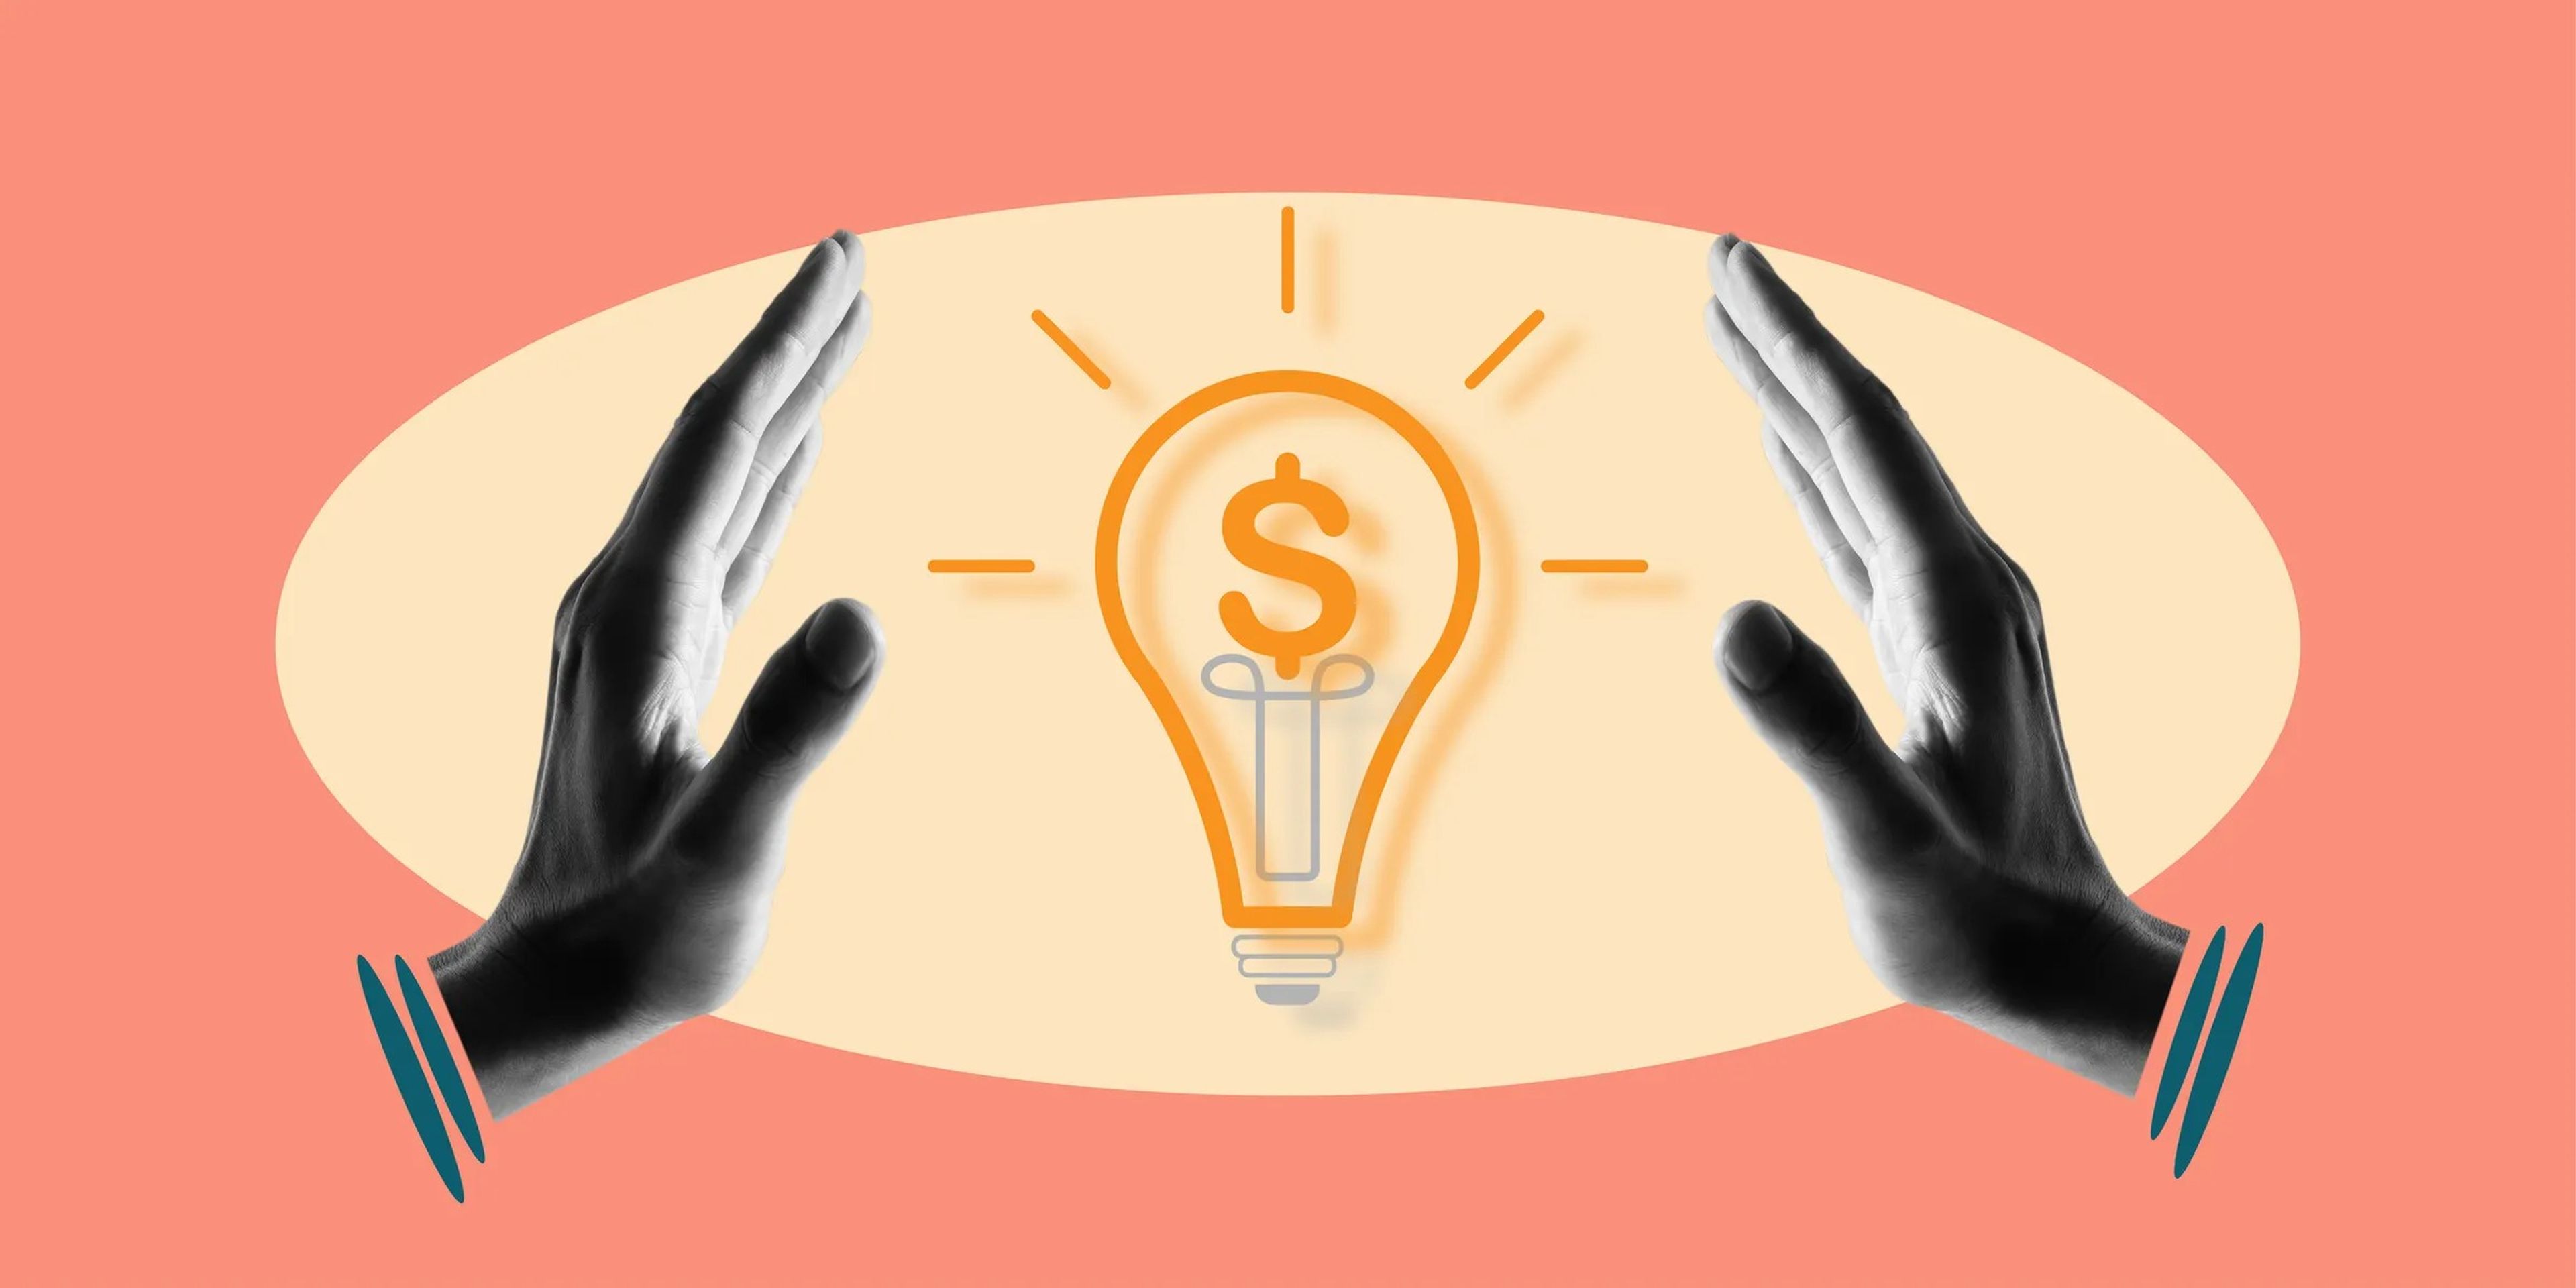 An illustration of hands around a light bulb marked with a dollar sign